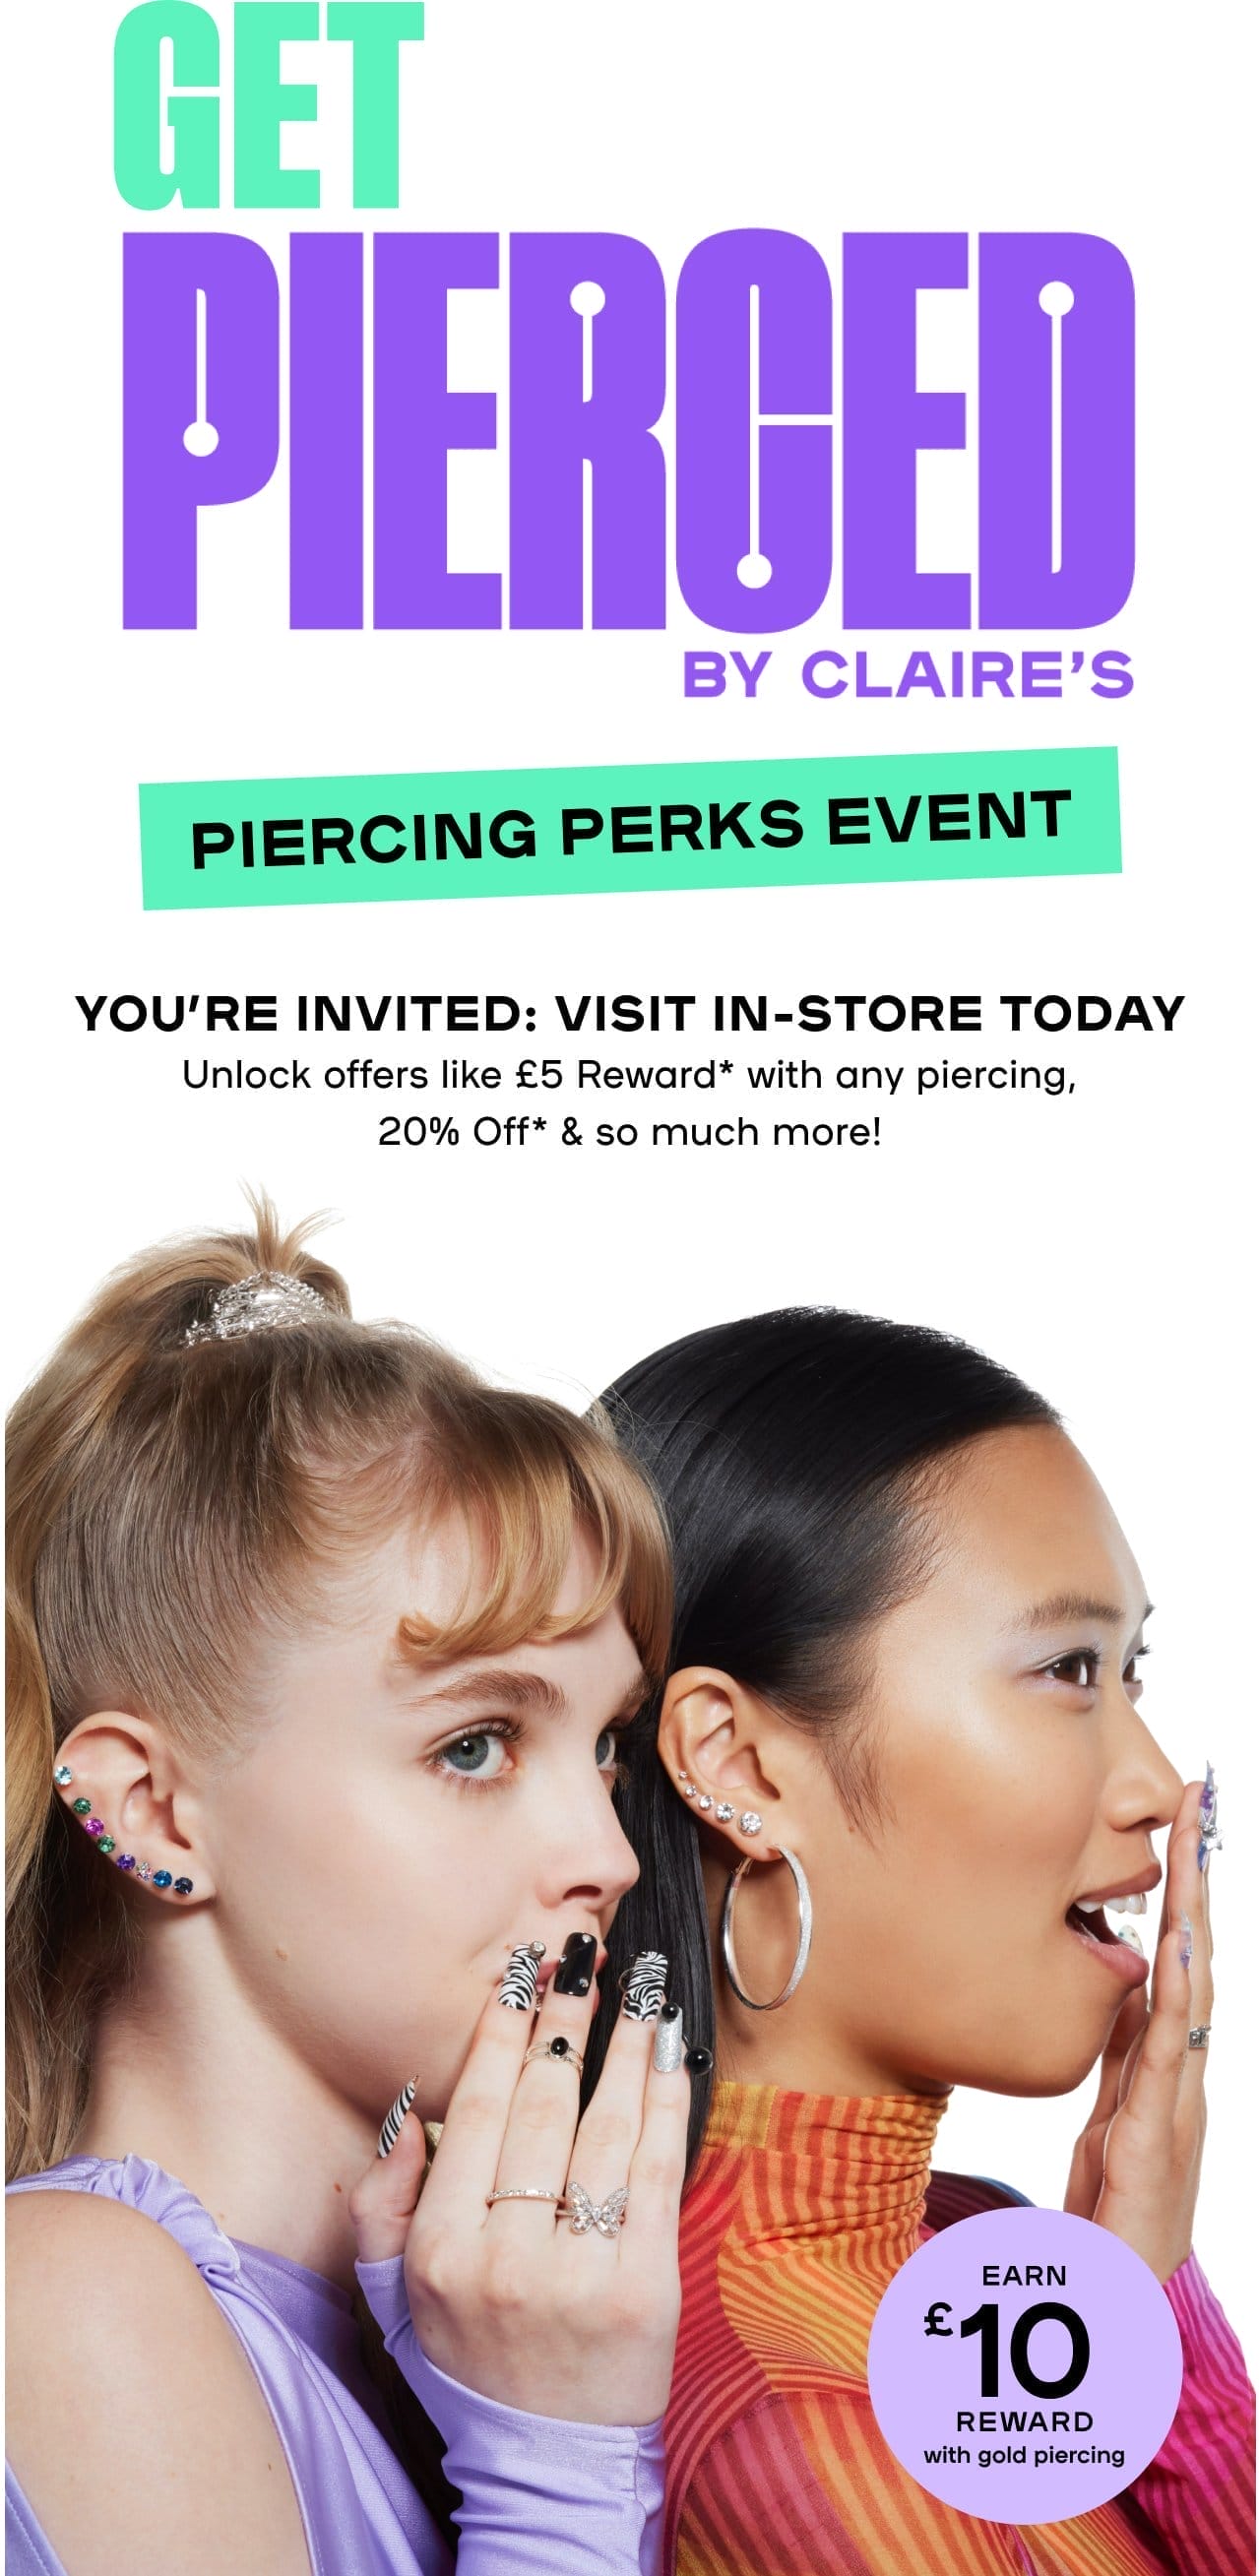  Get Pierced By Claire’s Piercing Perks Event Splat: Earn £10 Reward with gold piercing 